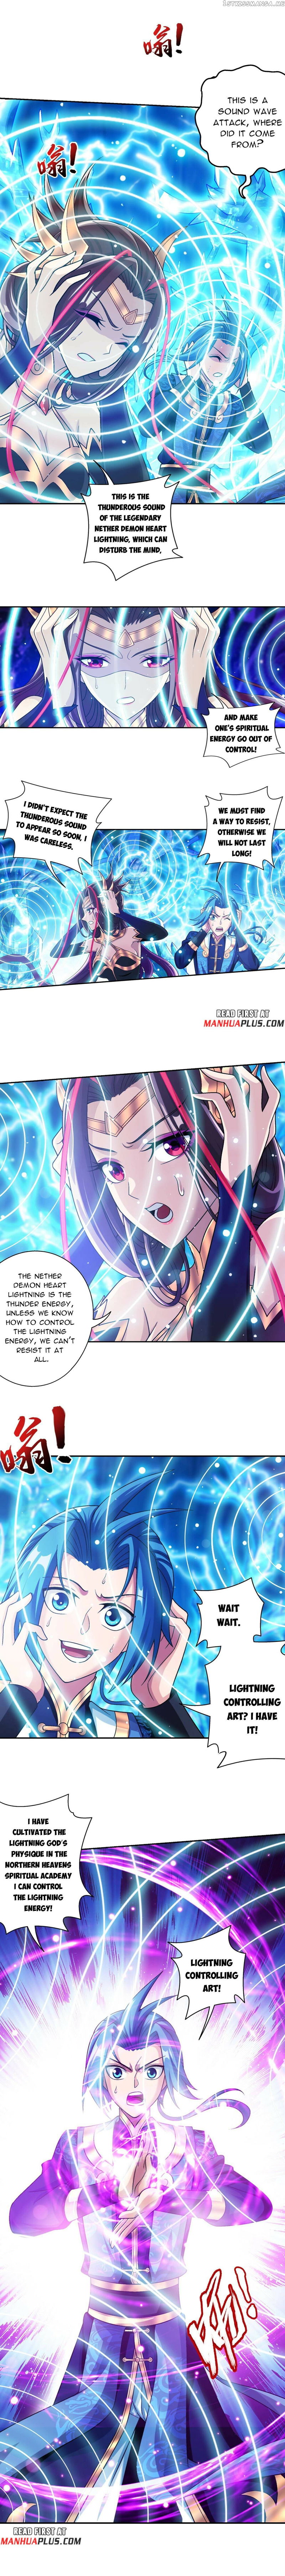 The Great Ruler Chapter 411 page 6